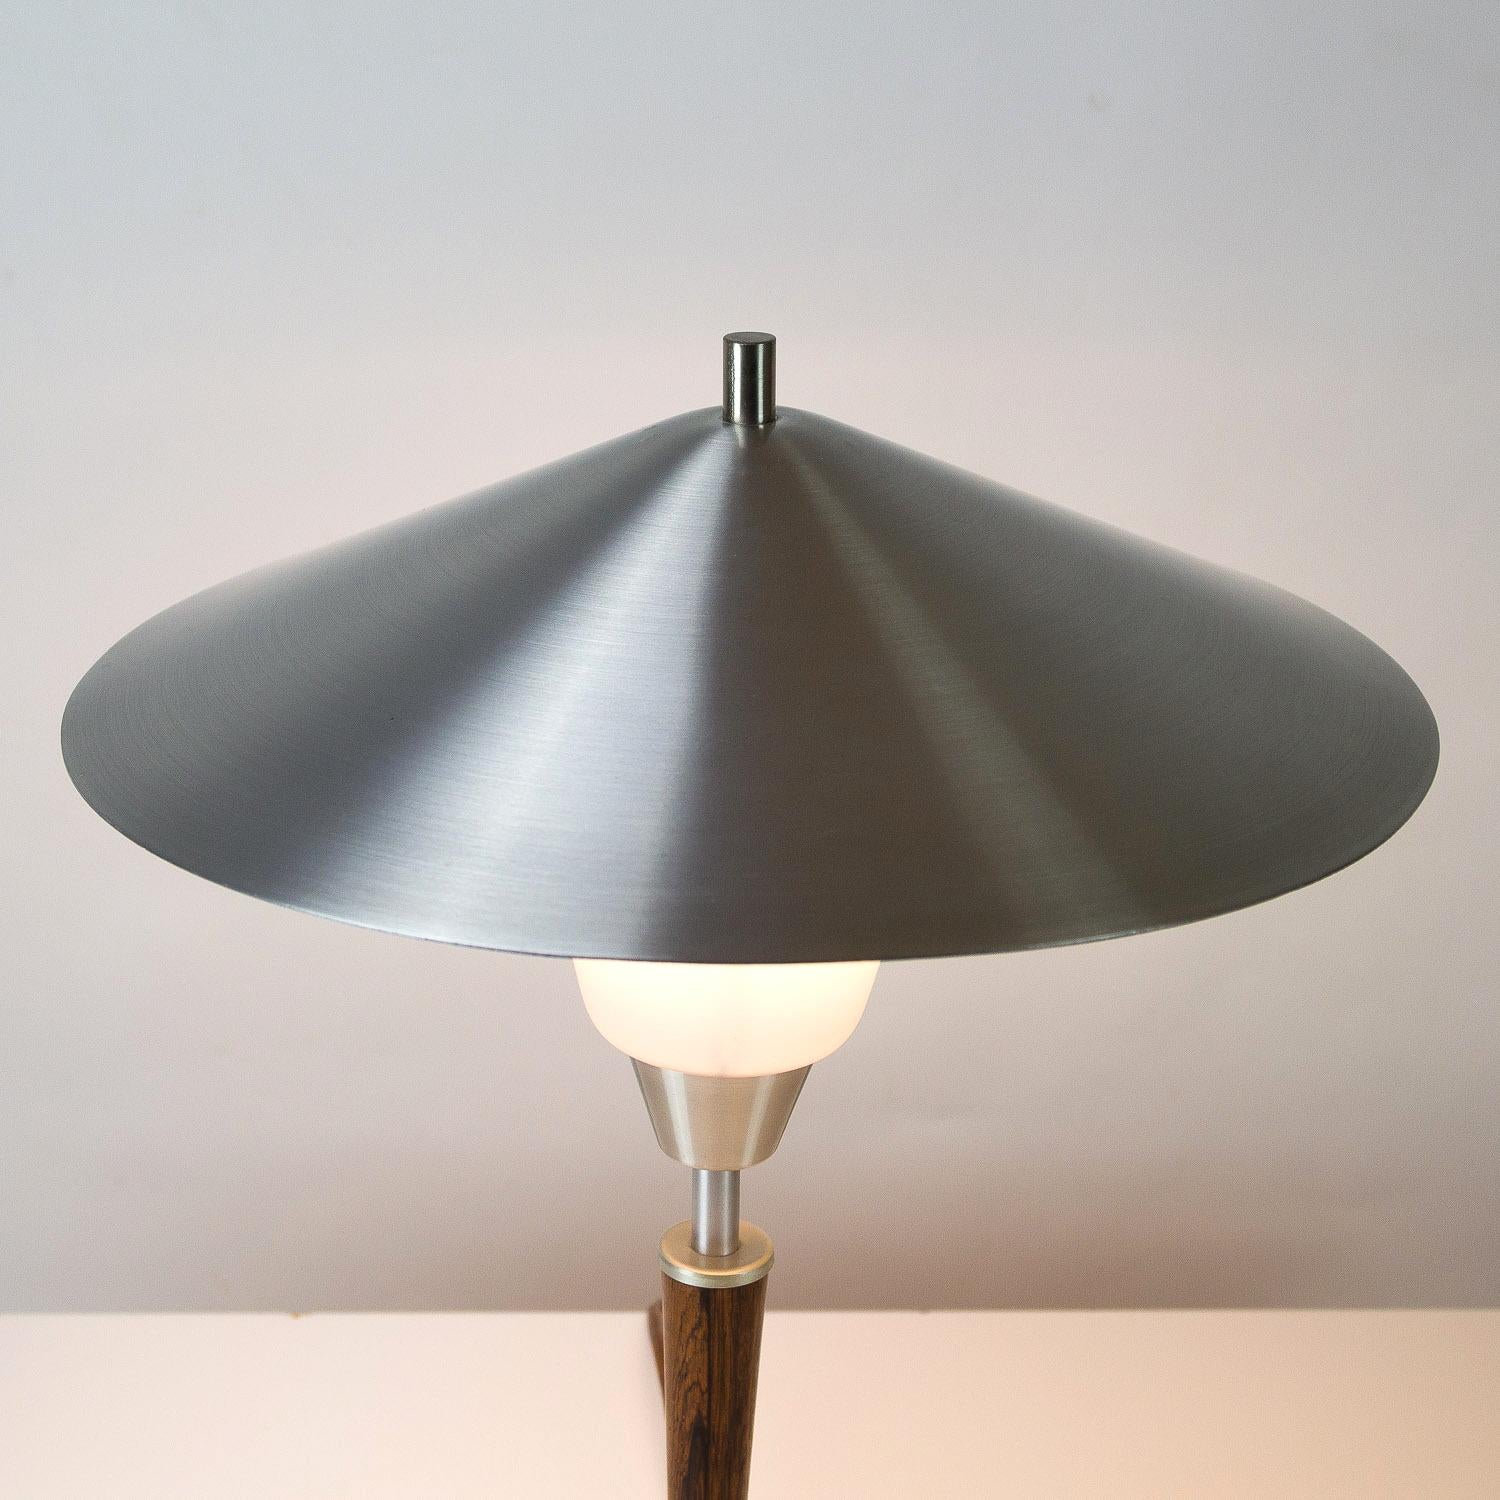 Mid-20th Century Rosewood, Aluminium and Opaline Glass Table Lamp by Fog & Mørup, Denmark, 1950s